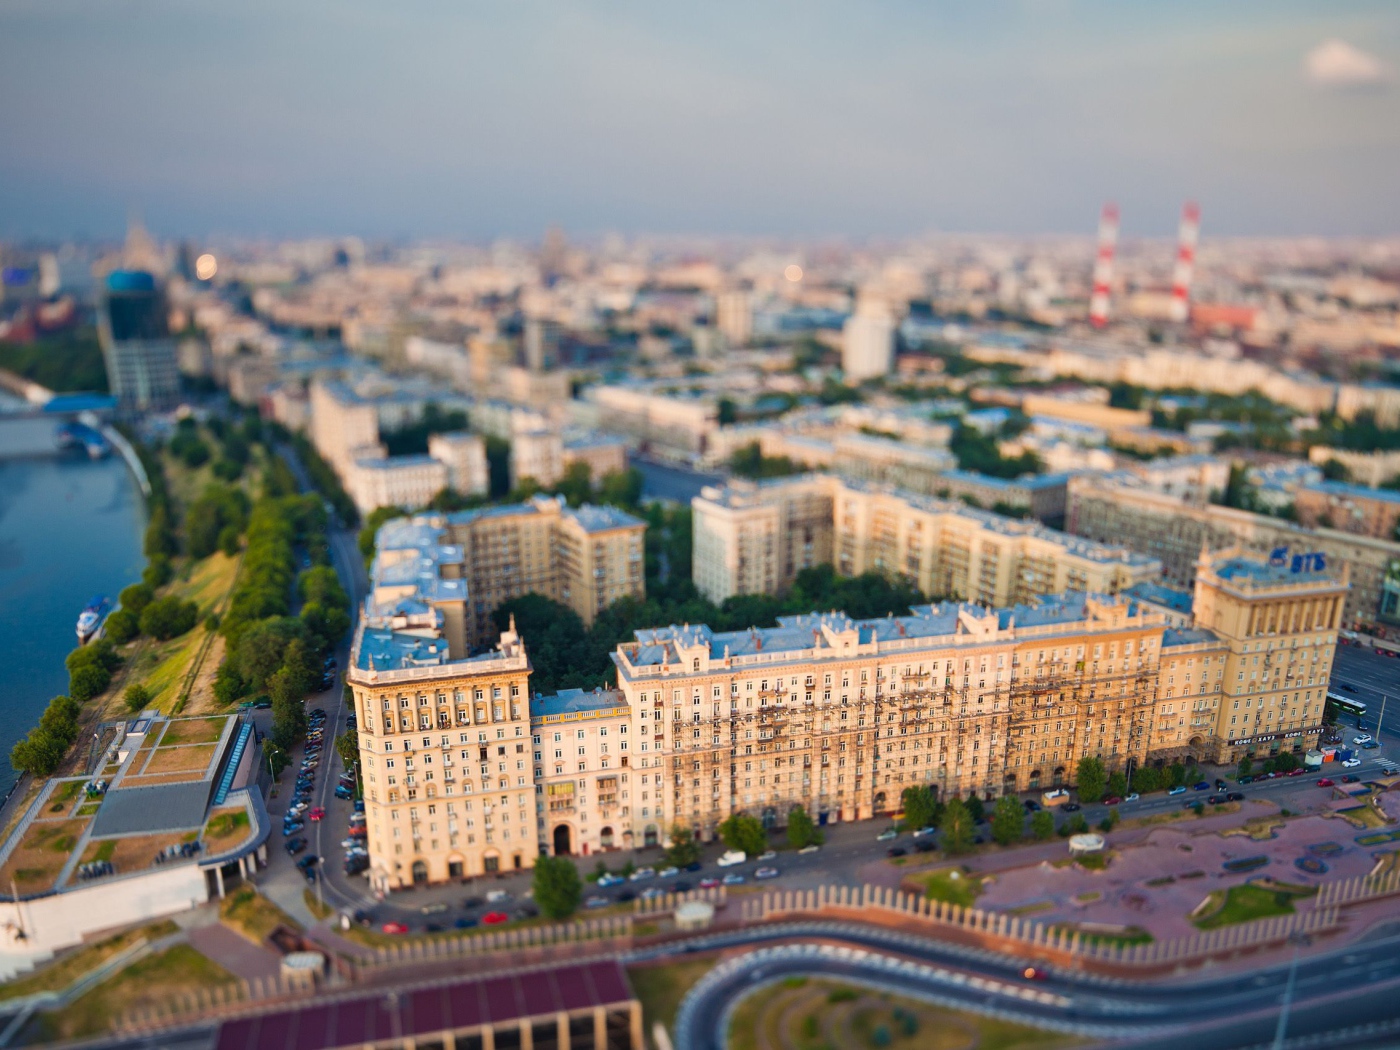 The Buildings in the moscow